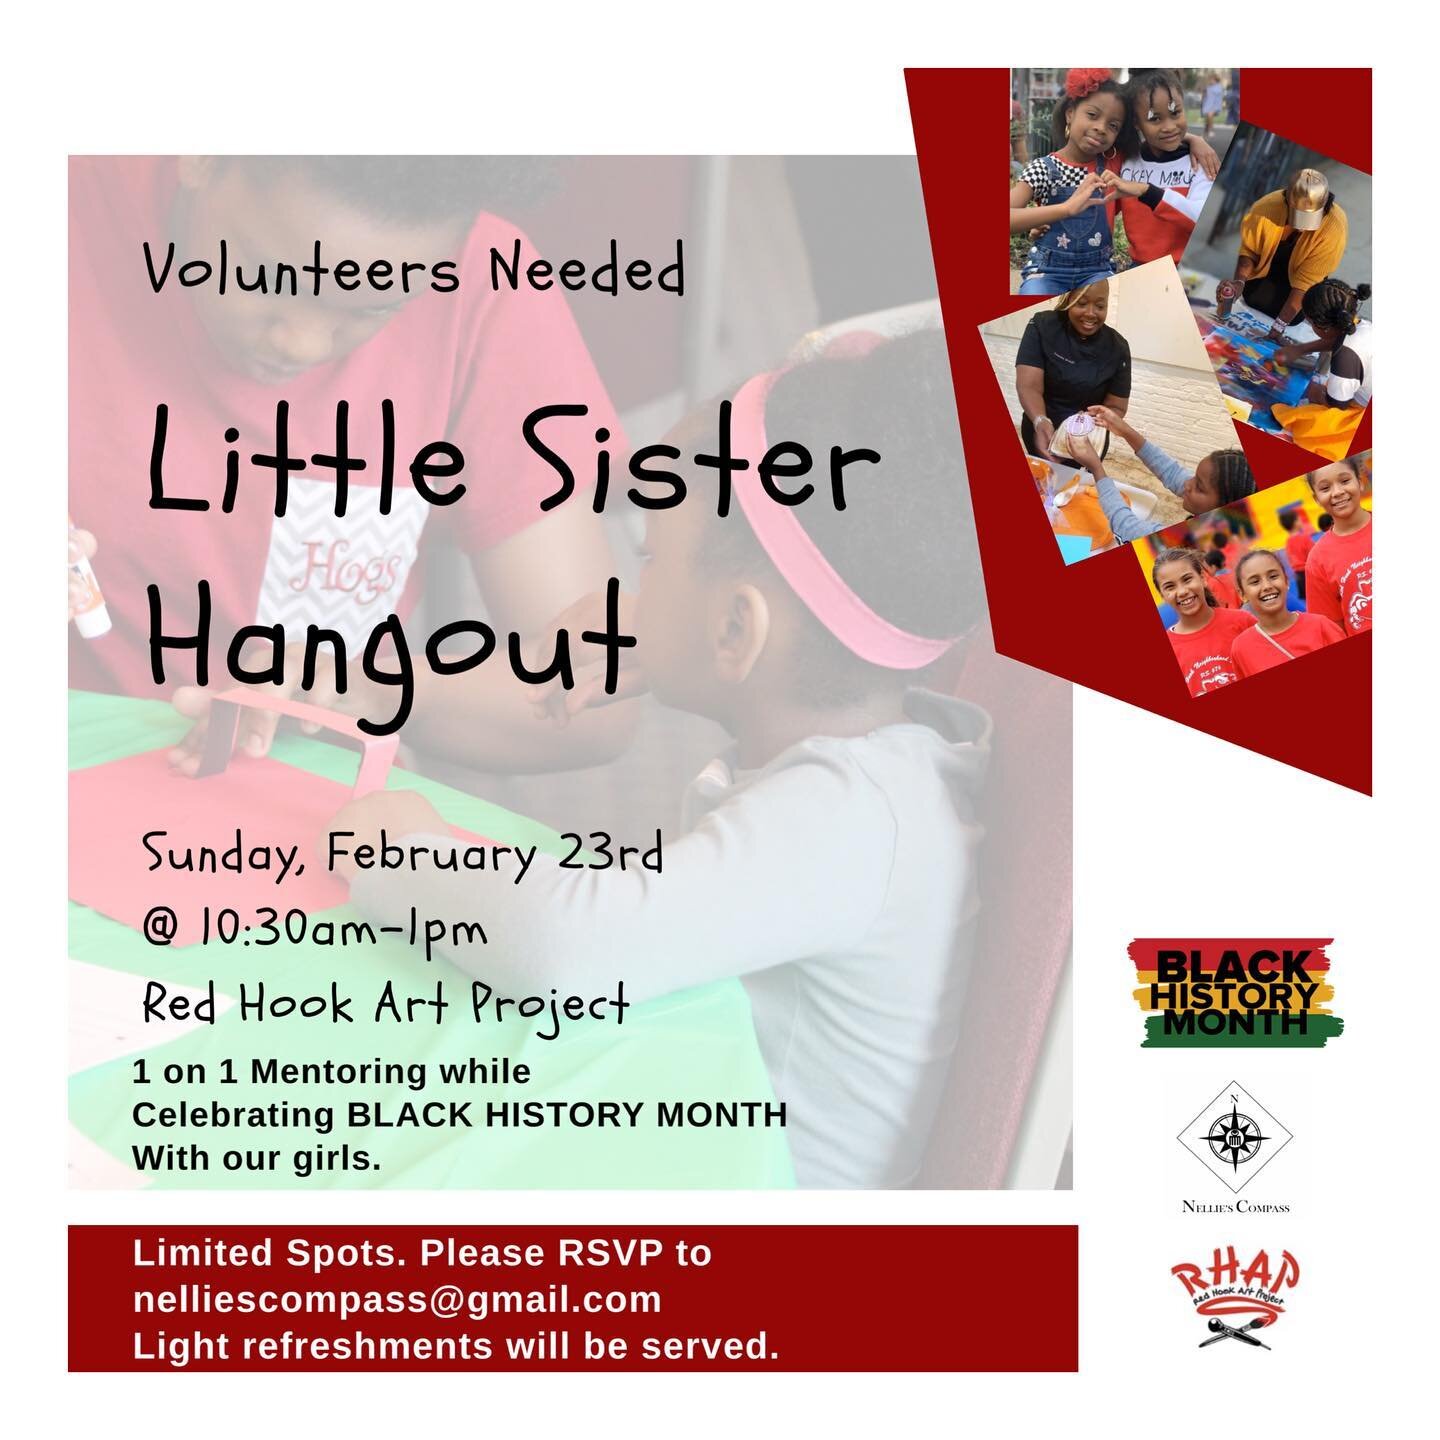 Nellie Cares! We&rsquo;re celebrating Black History Month at the @redhookartproject. This month&rsquo;s Little Sister Hangout will be dedicated to empowering our girls with accomplishments by Black Women. To volunteer your time, please send us an ema